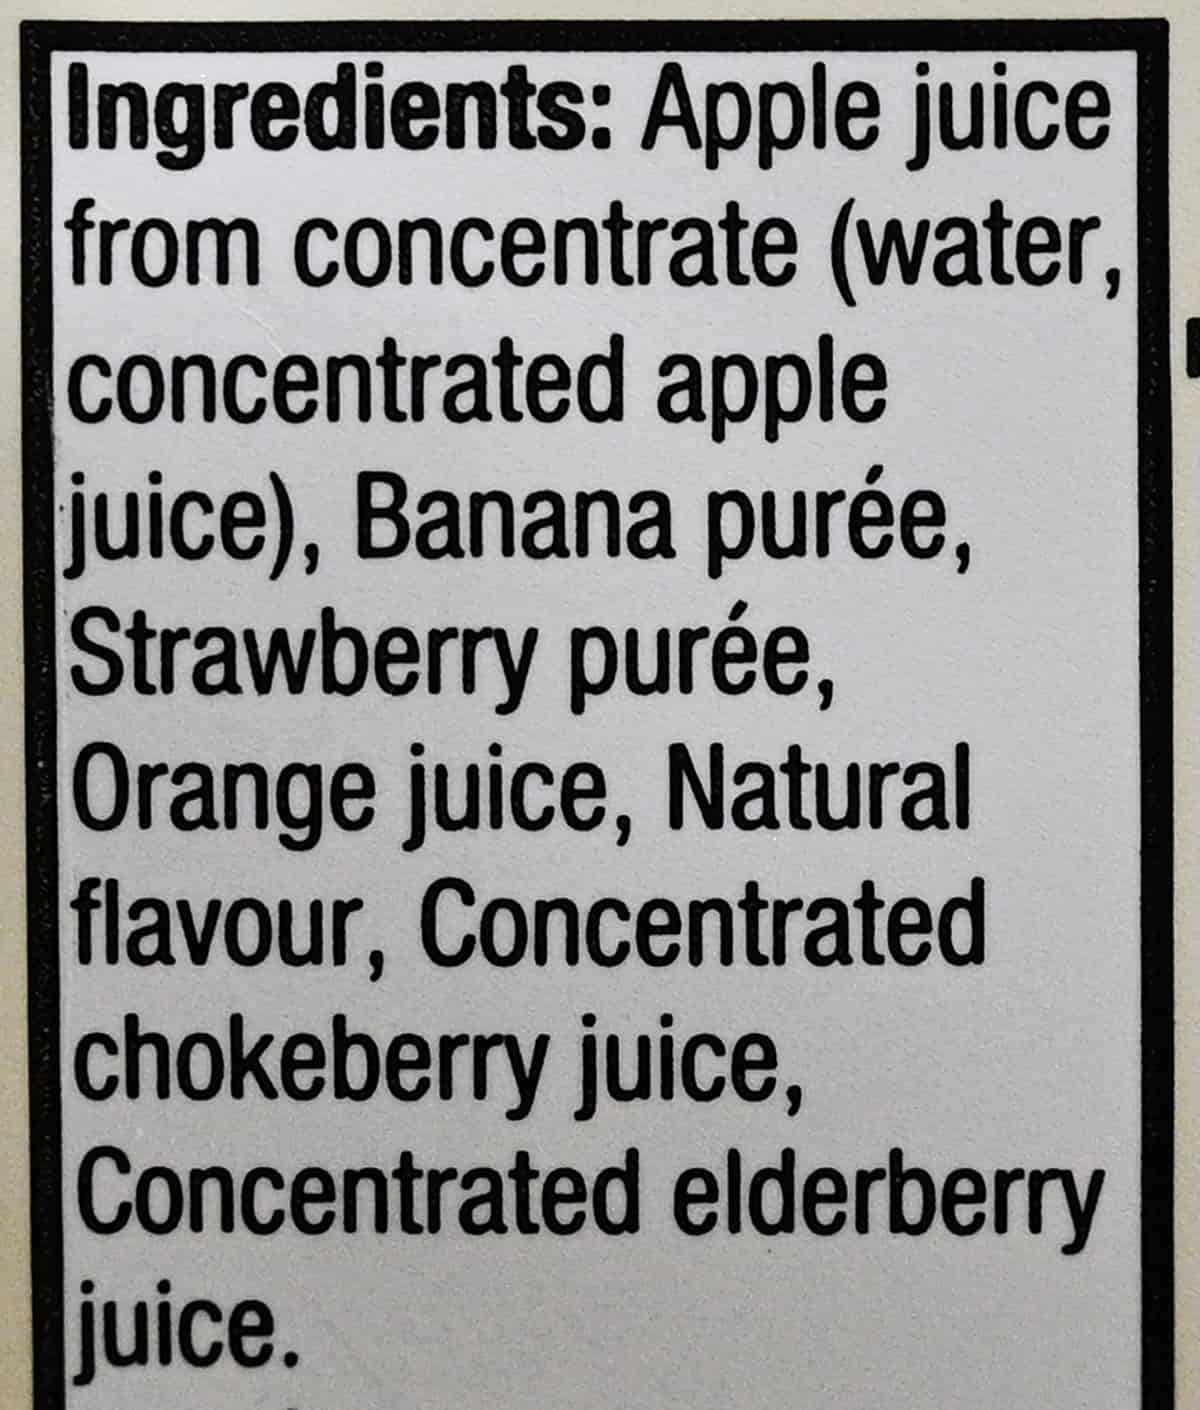 Strawberry banana ingredients label from the back of the container.